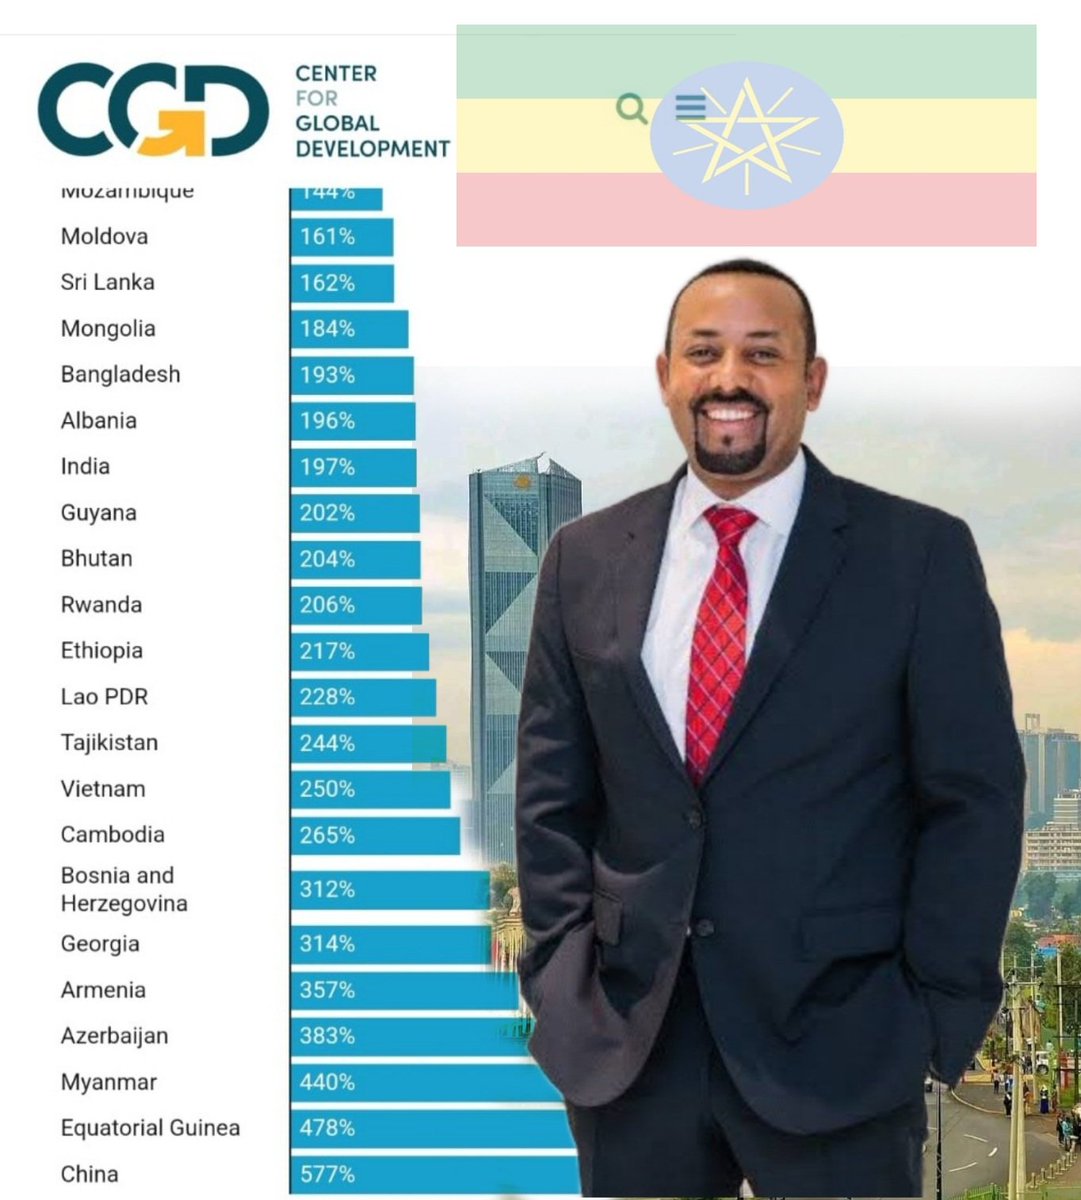 A heroic leader who made Ethiopia stand out on the world stage in terms of universal development.
@AbiyAhmedAli
@IMFNews